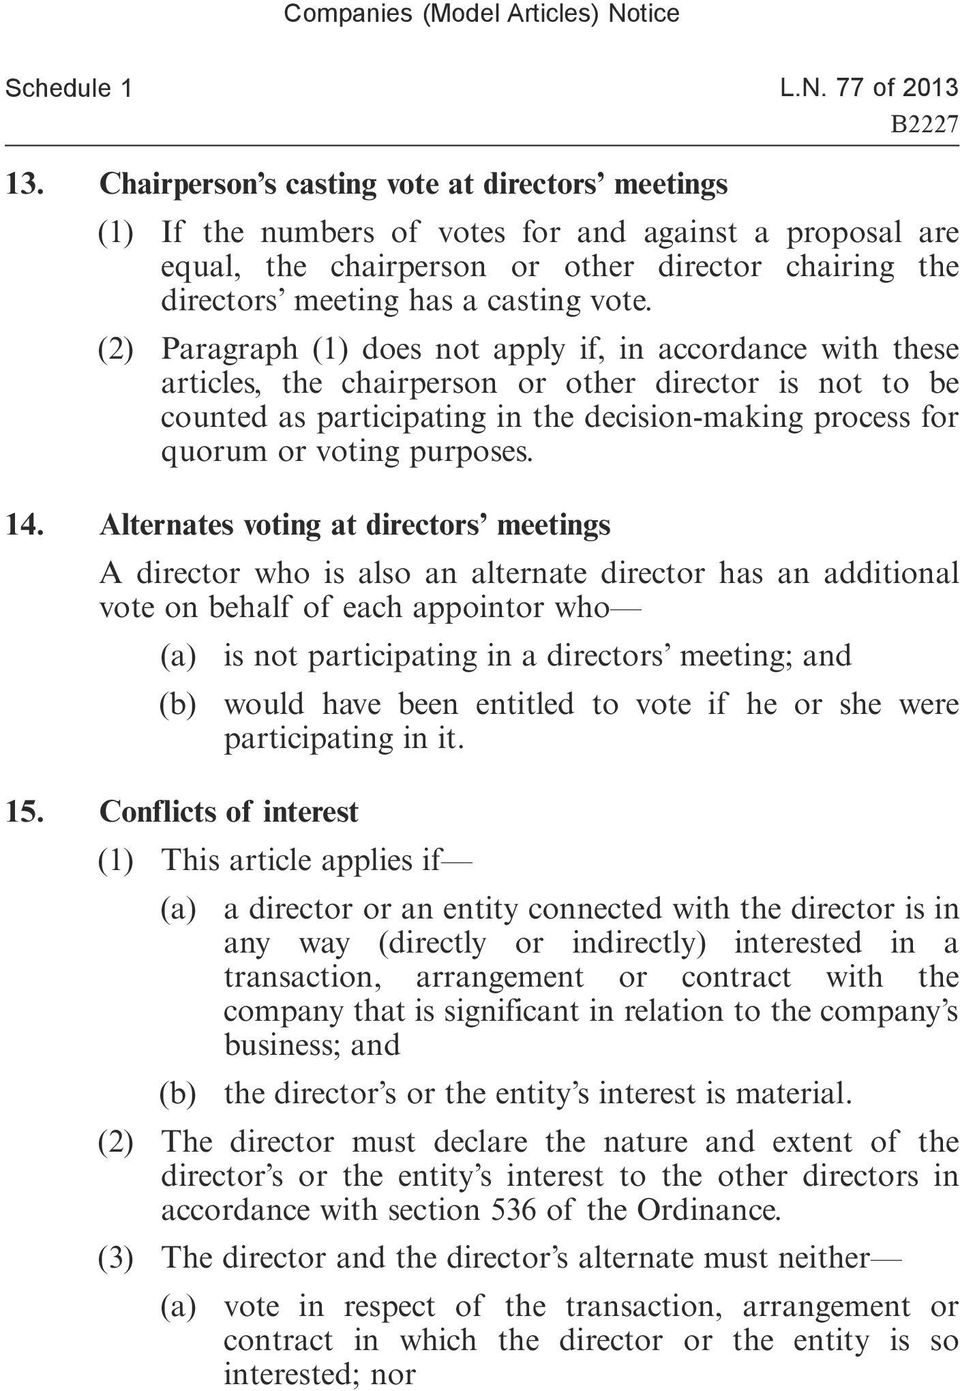 (2) Paragraph (1) does not apply if, in accordance with these articles, the chairperson or other director is not to be counted as participating in the decision-making process for quorum or voting